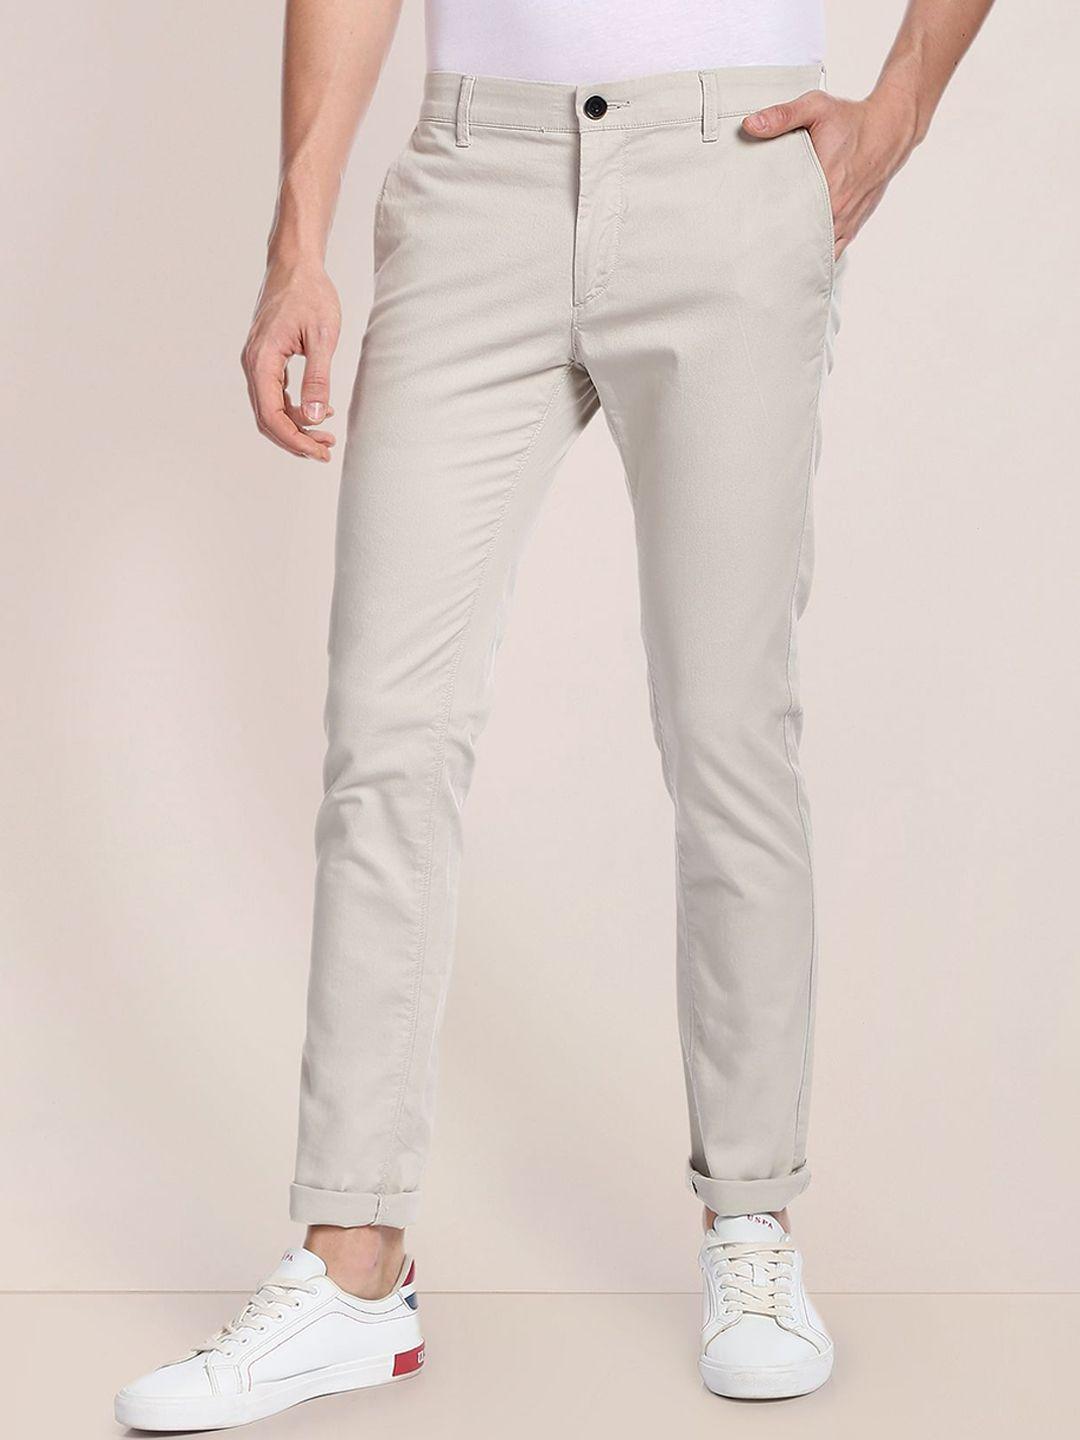 u.s. polo assn. men slim fit mid-rise chinos